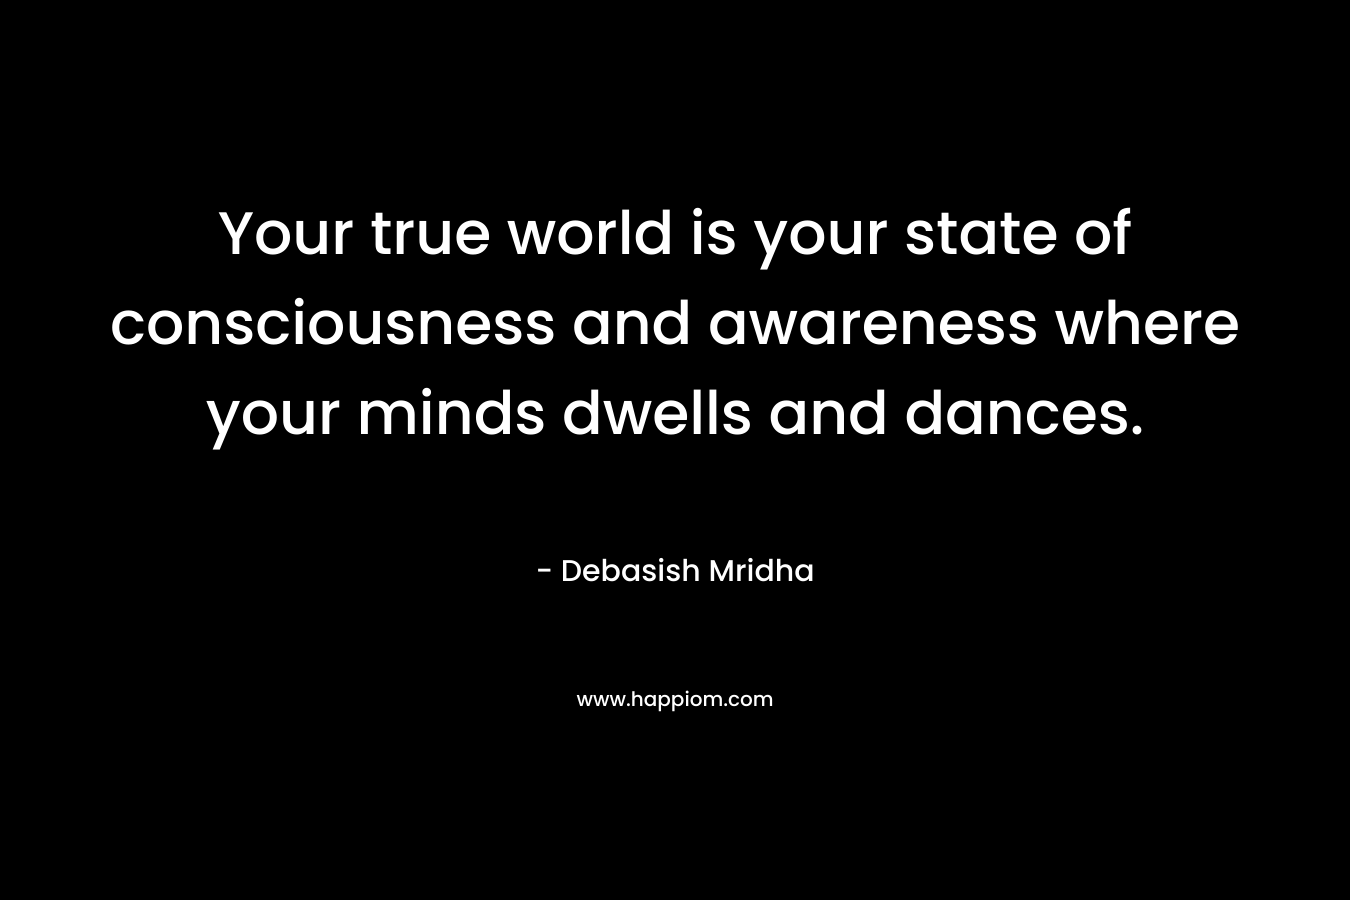 Your true world is your state of consciousness and awareness where your minds dwells and dances.